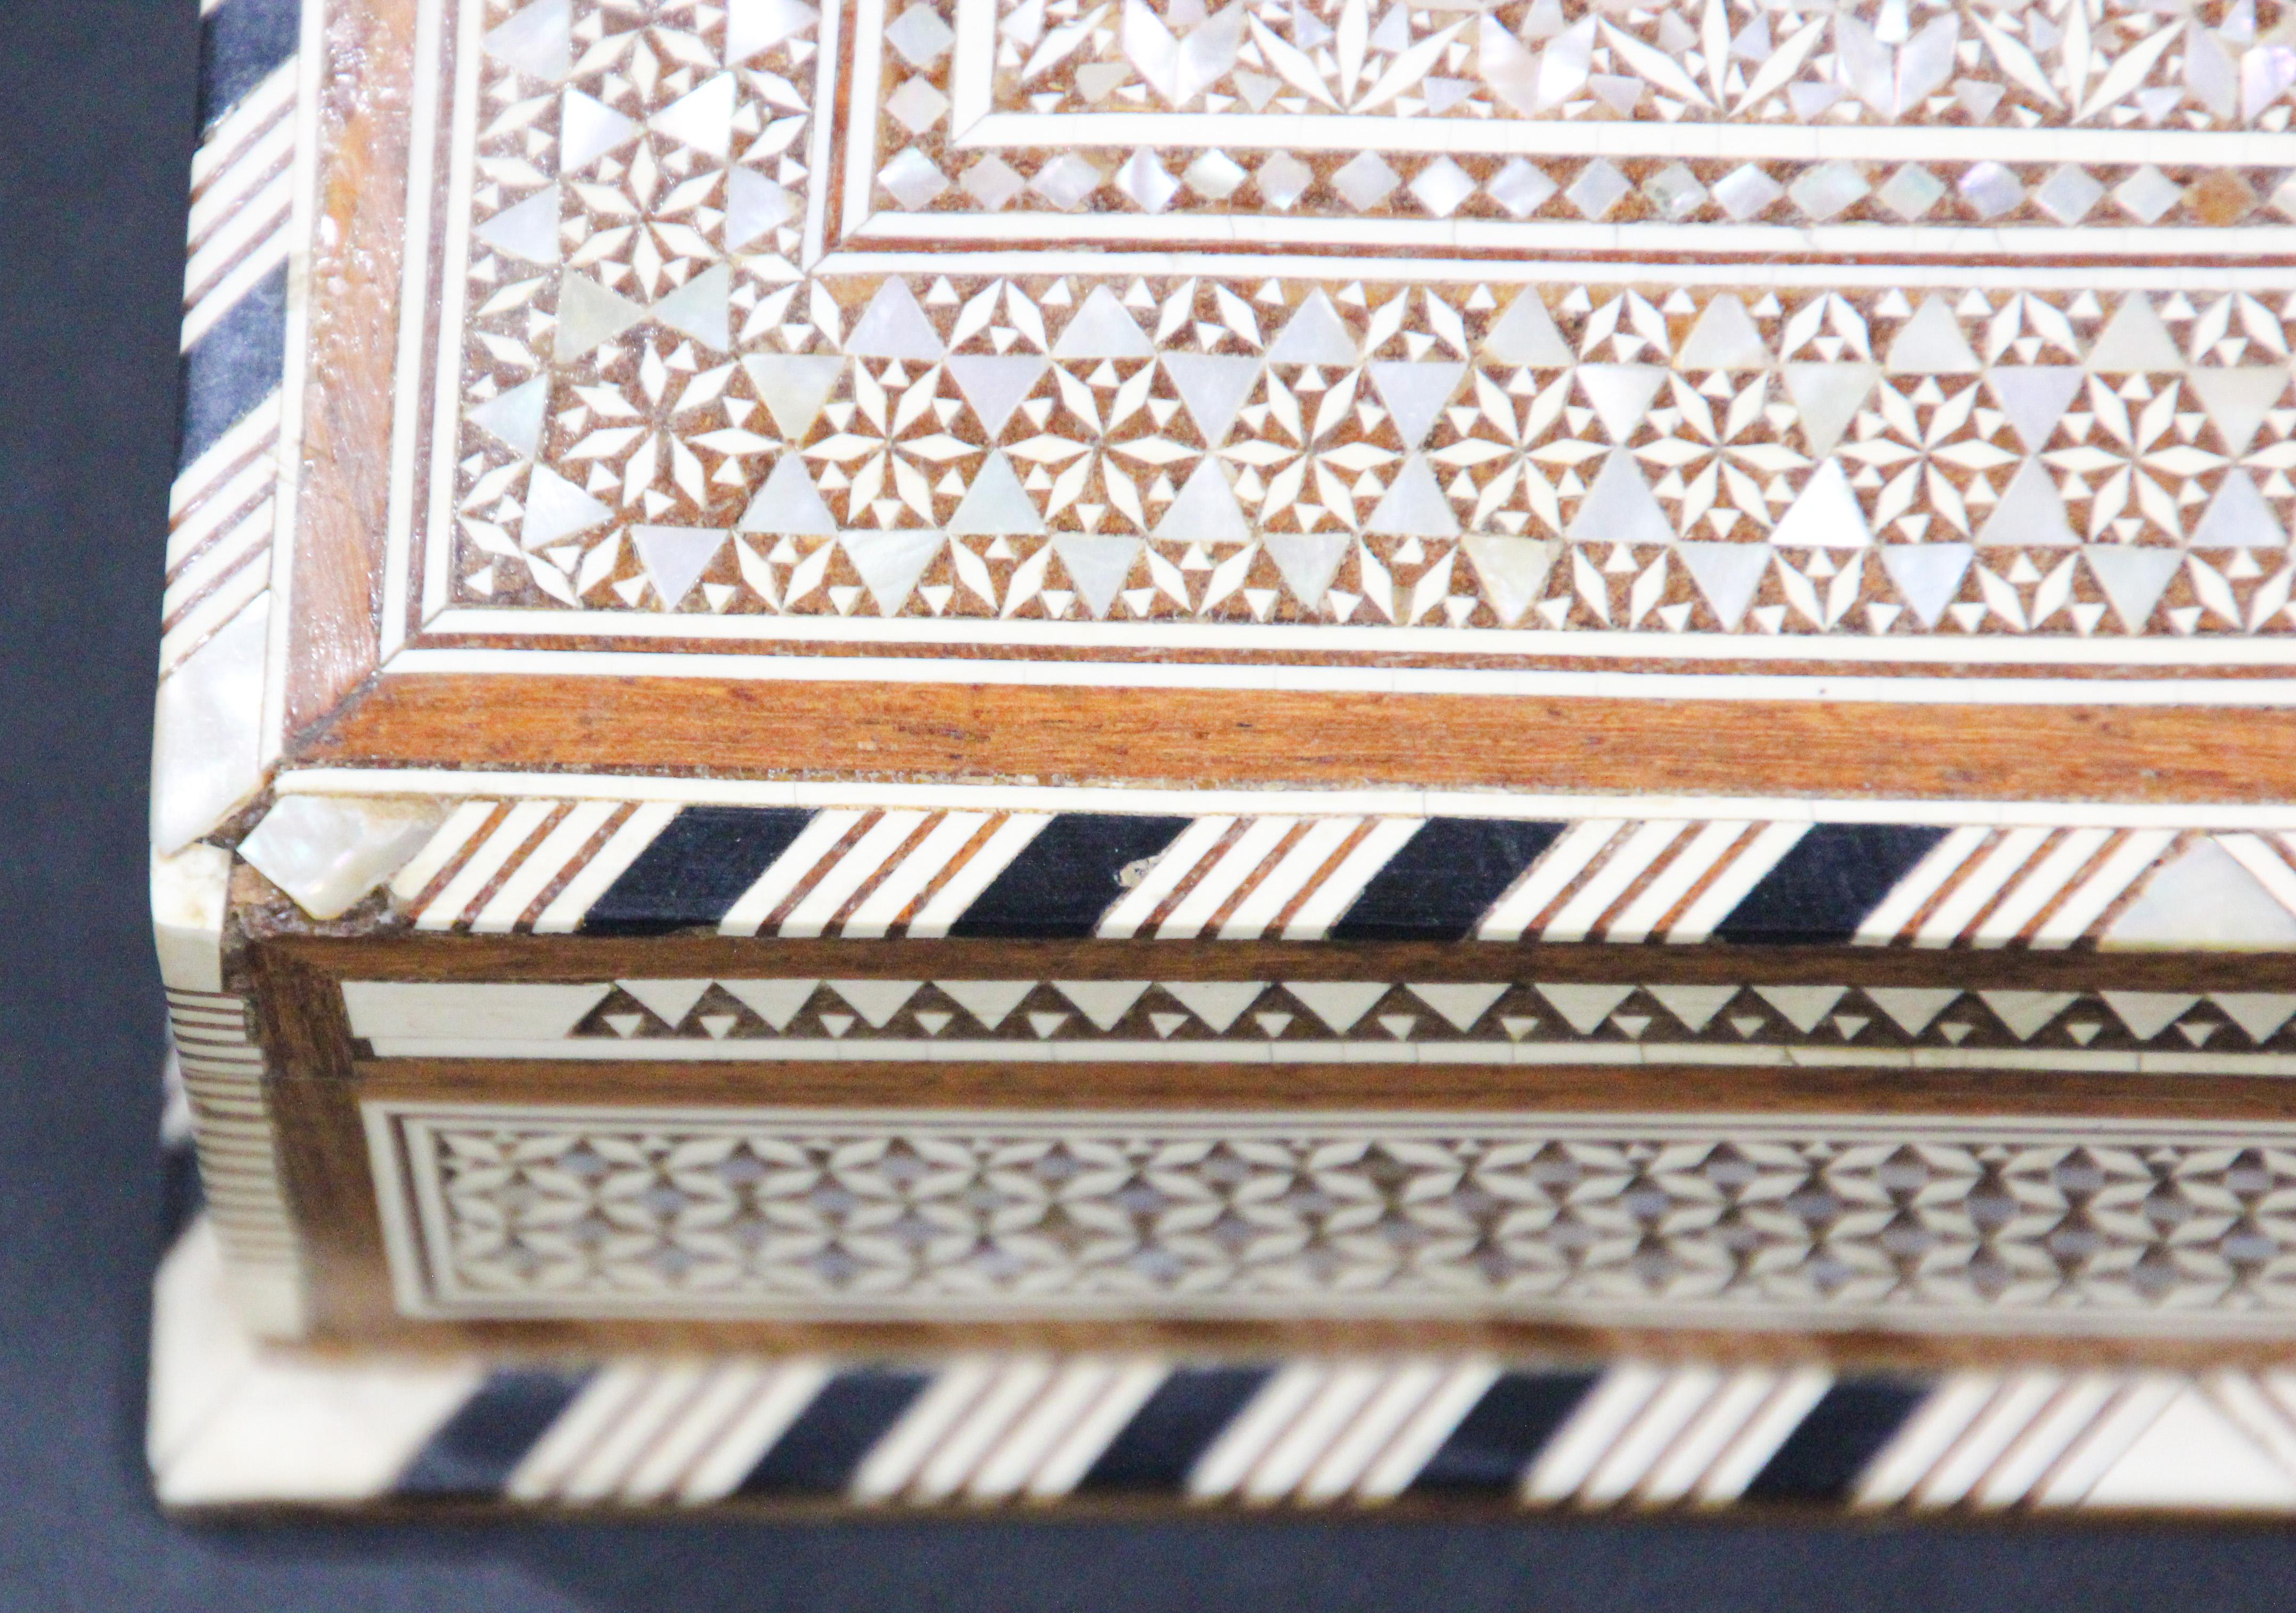 Moorish Handcrafted Middle Eastern Mosaic Inlaid Decorative Box For Sale 2